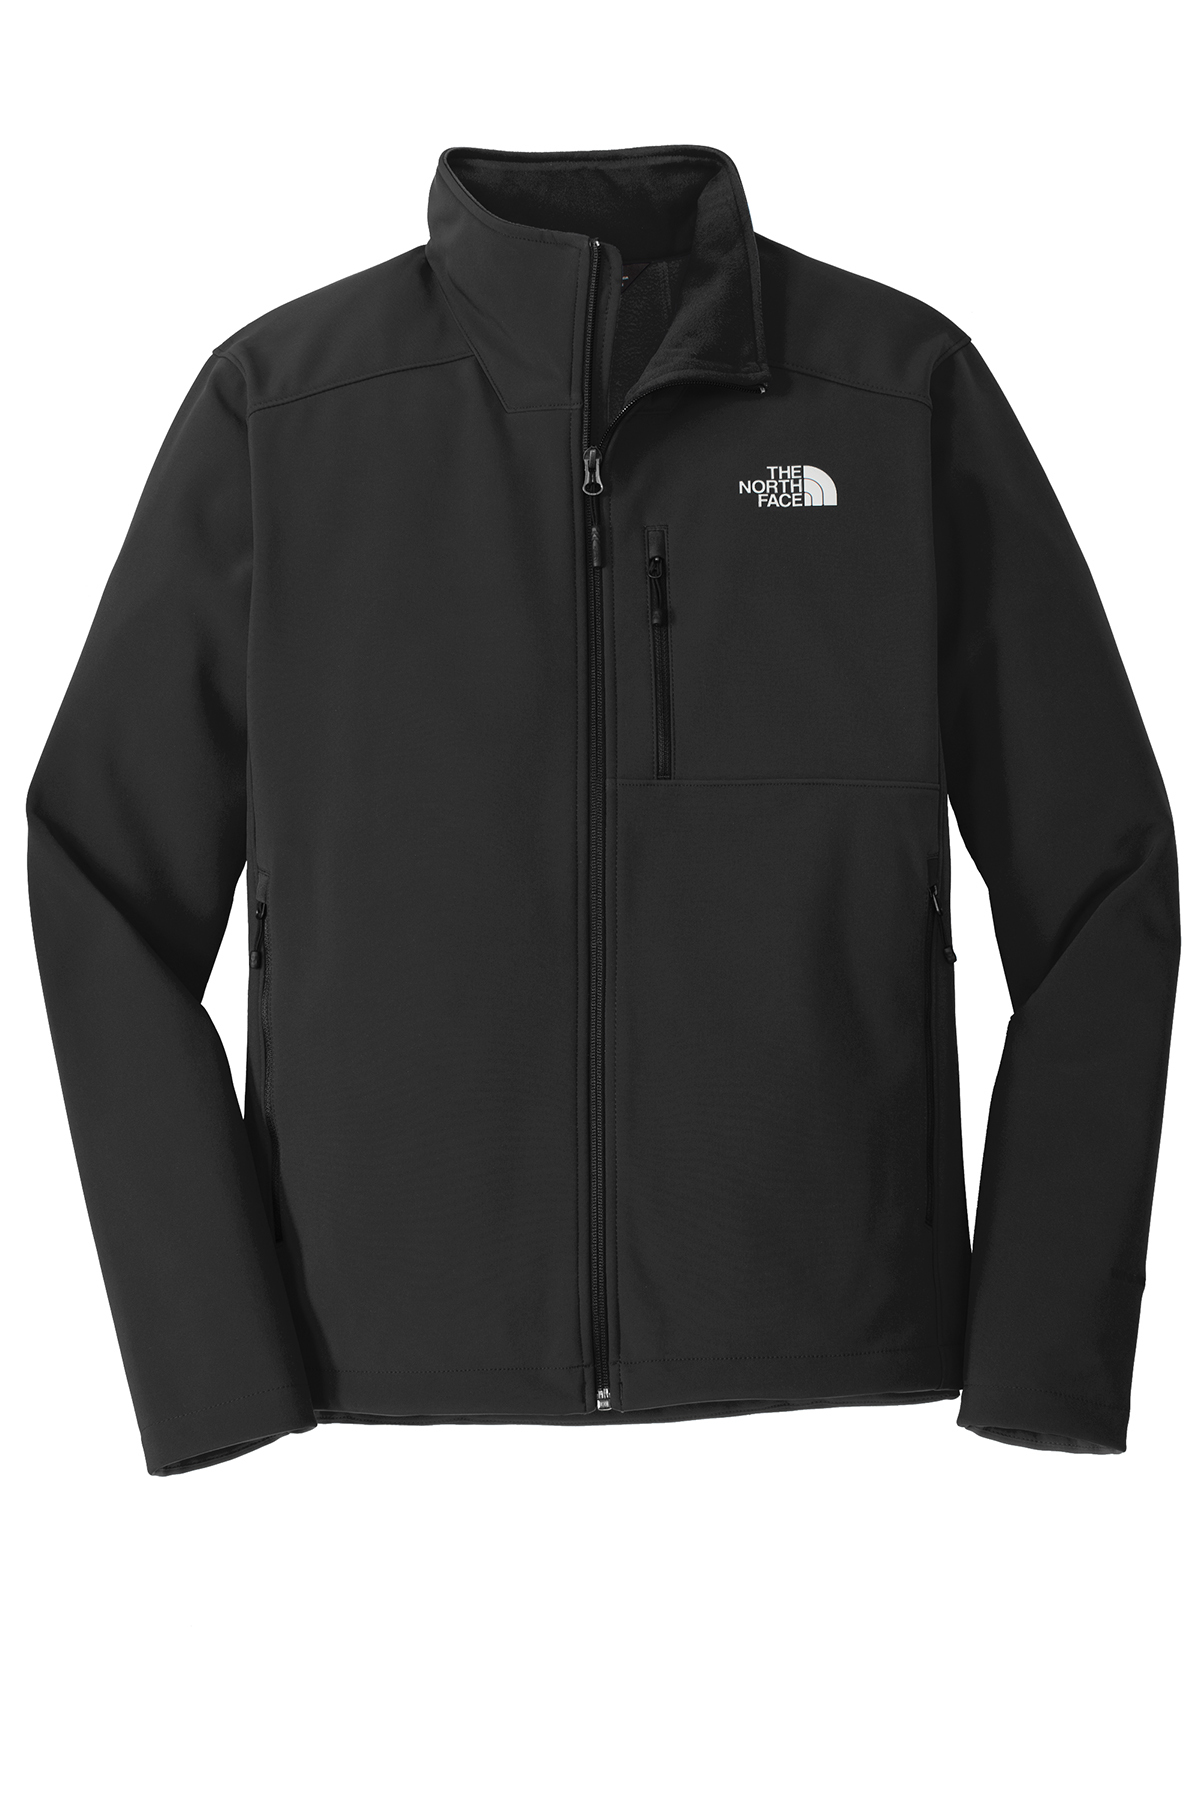 The North Face® NF0A3LGT - Men's Apex Barrier Soft Shell Jacket $153.45 ...